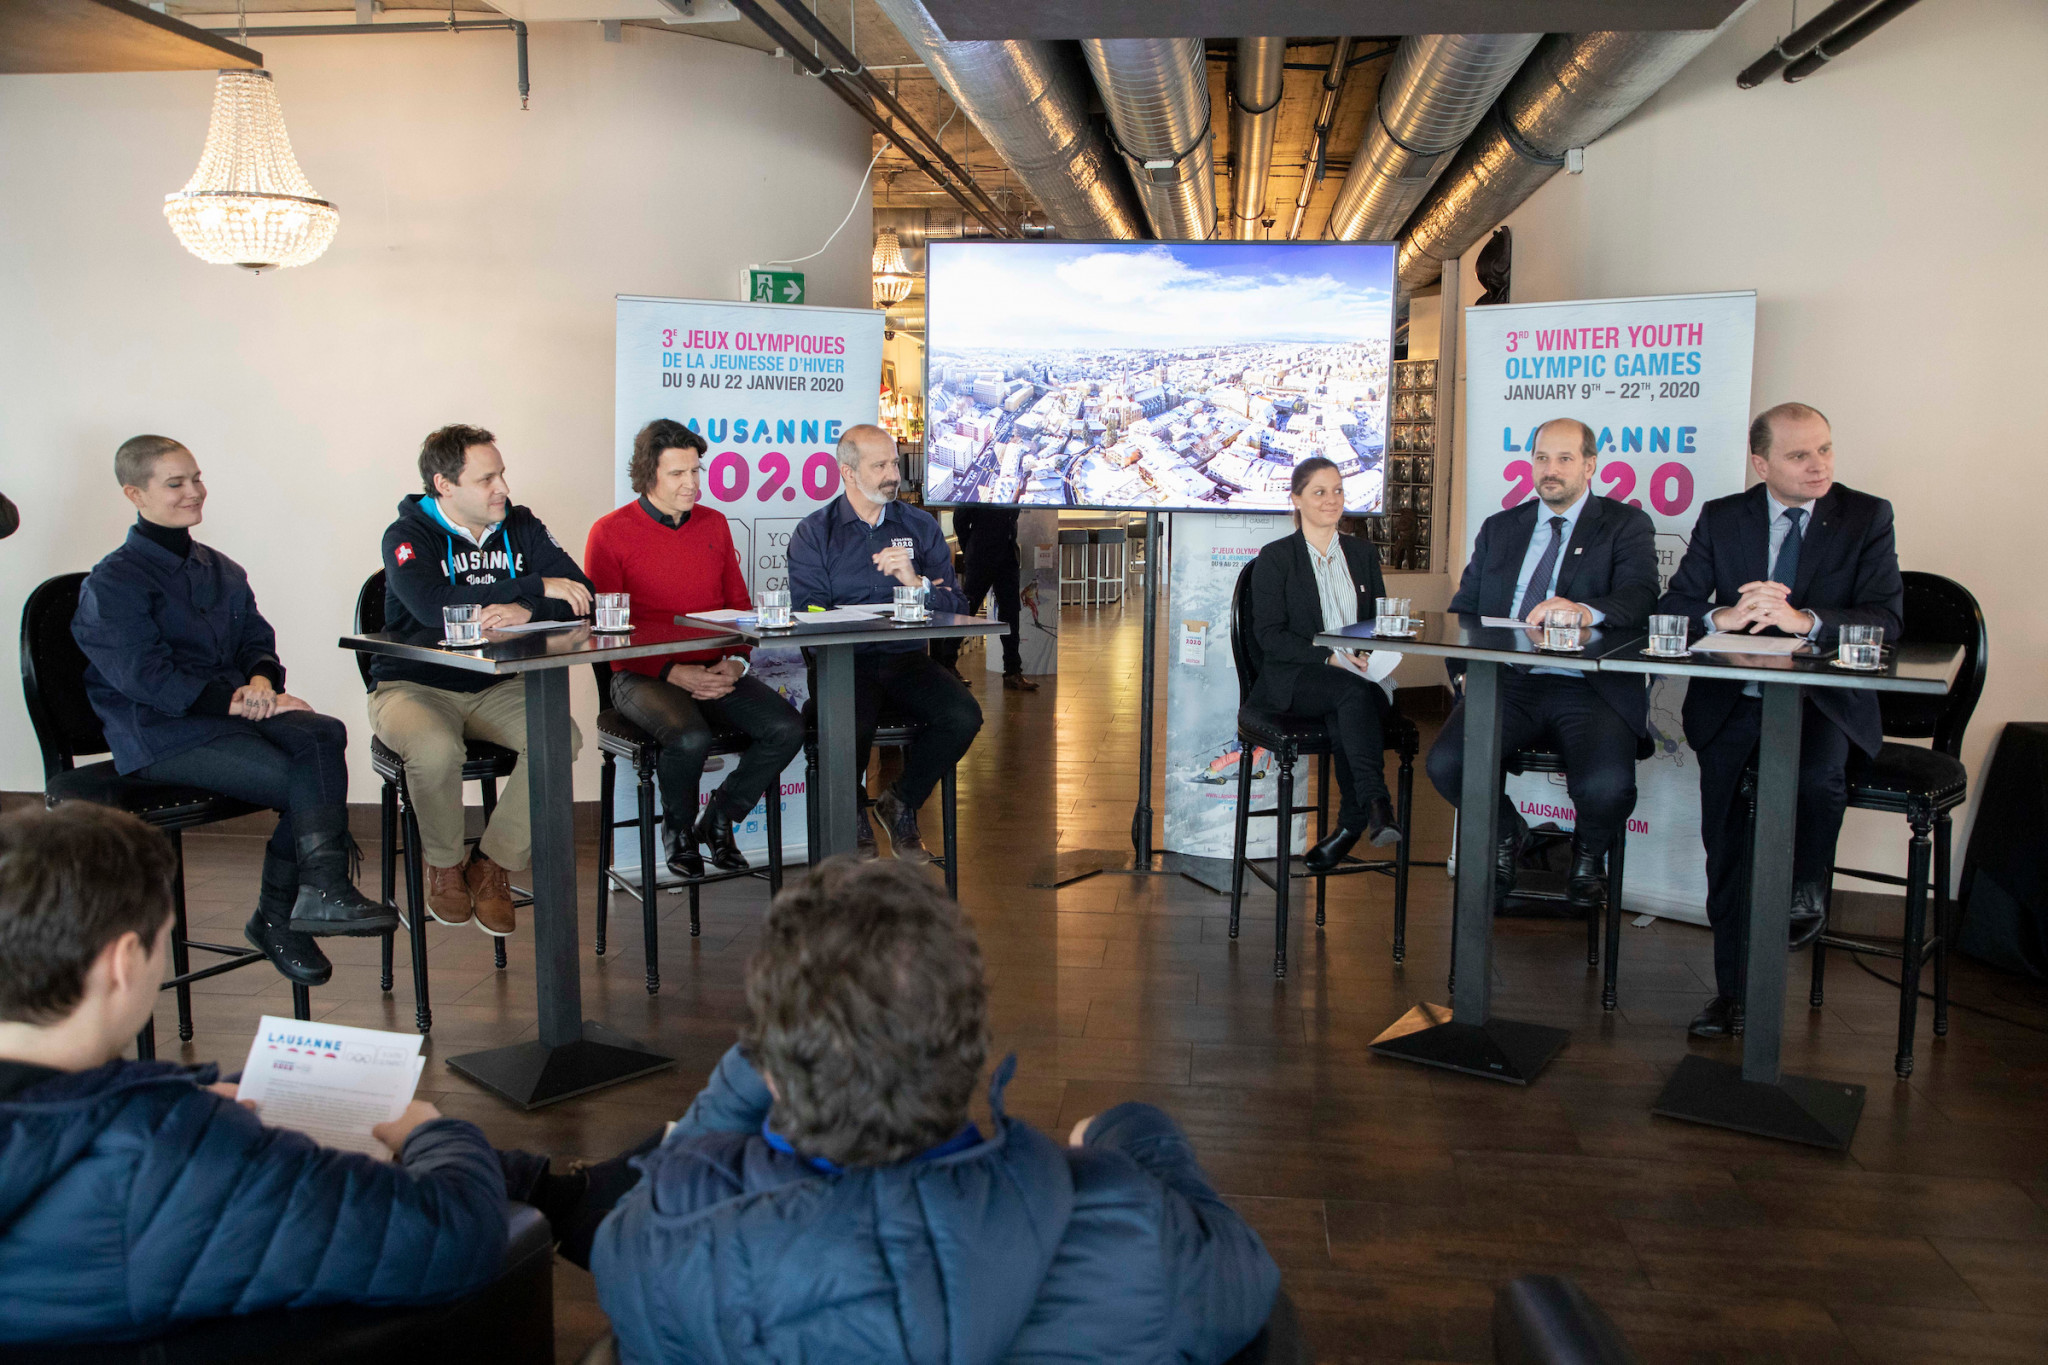 Lausanne 2020 to offer free access to sports events at Winter Youth Olympic Games